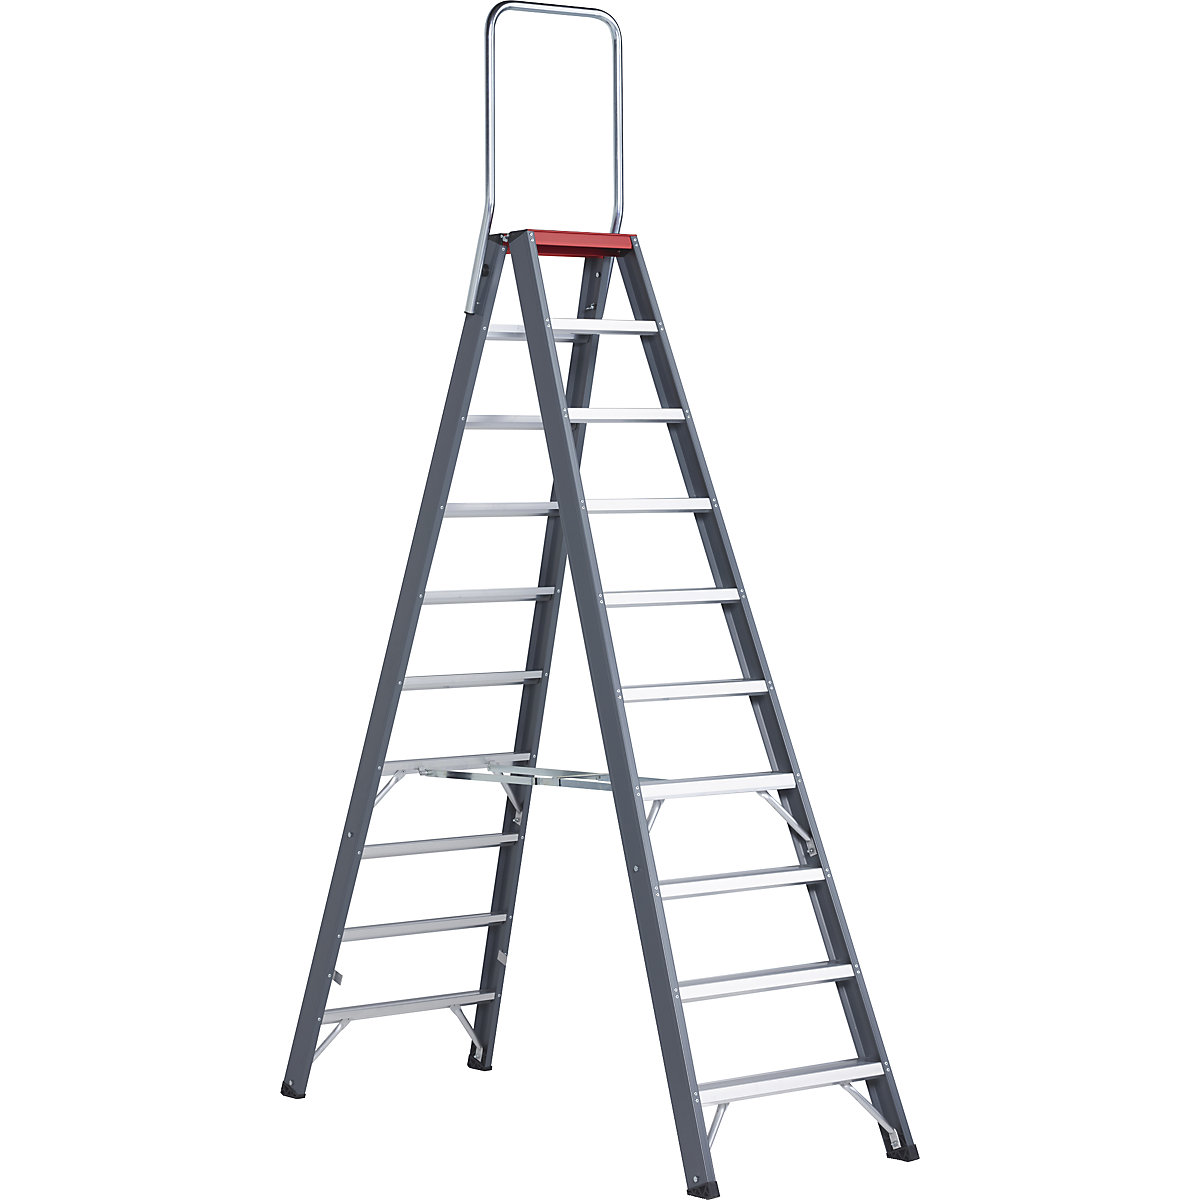 Aluminium step ladder – Altrex, double sided access, 2 x 10 steps, working height 4350 mm-8